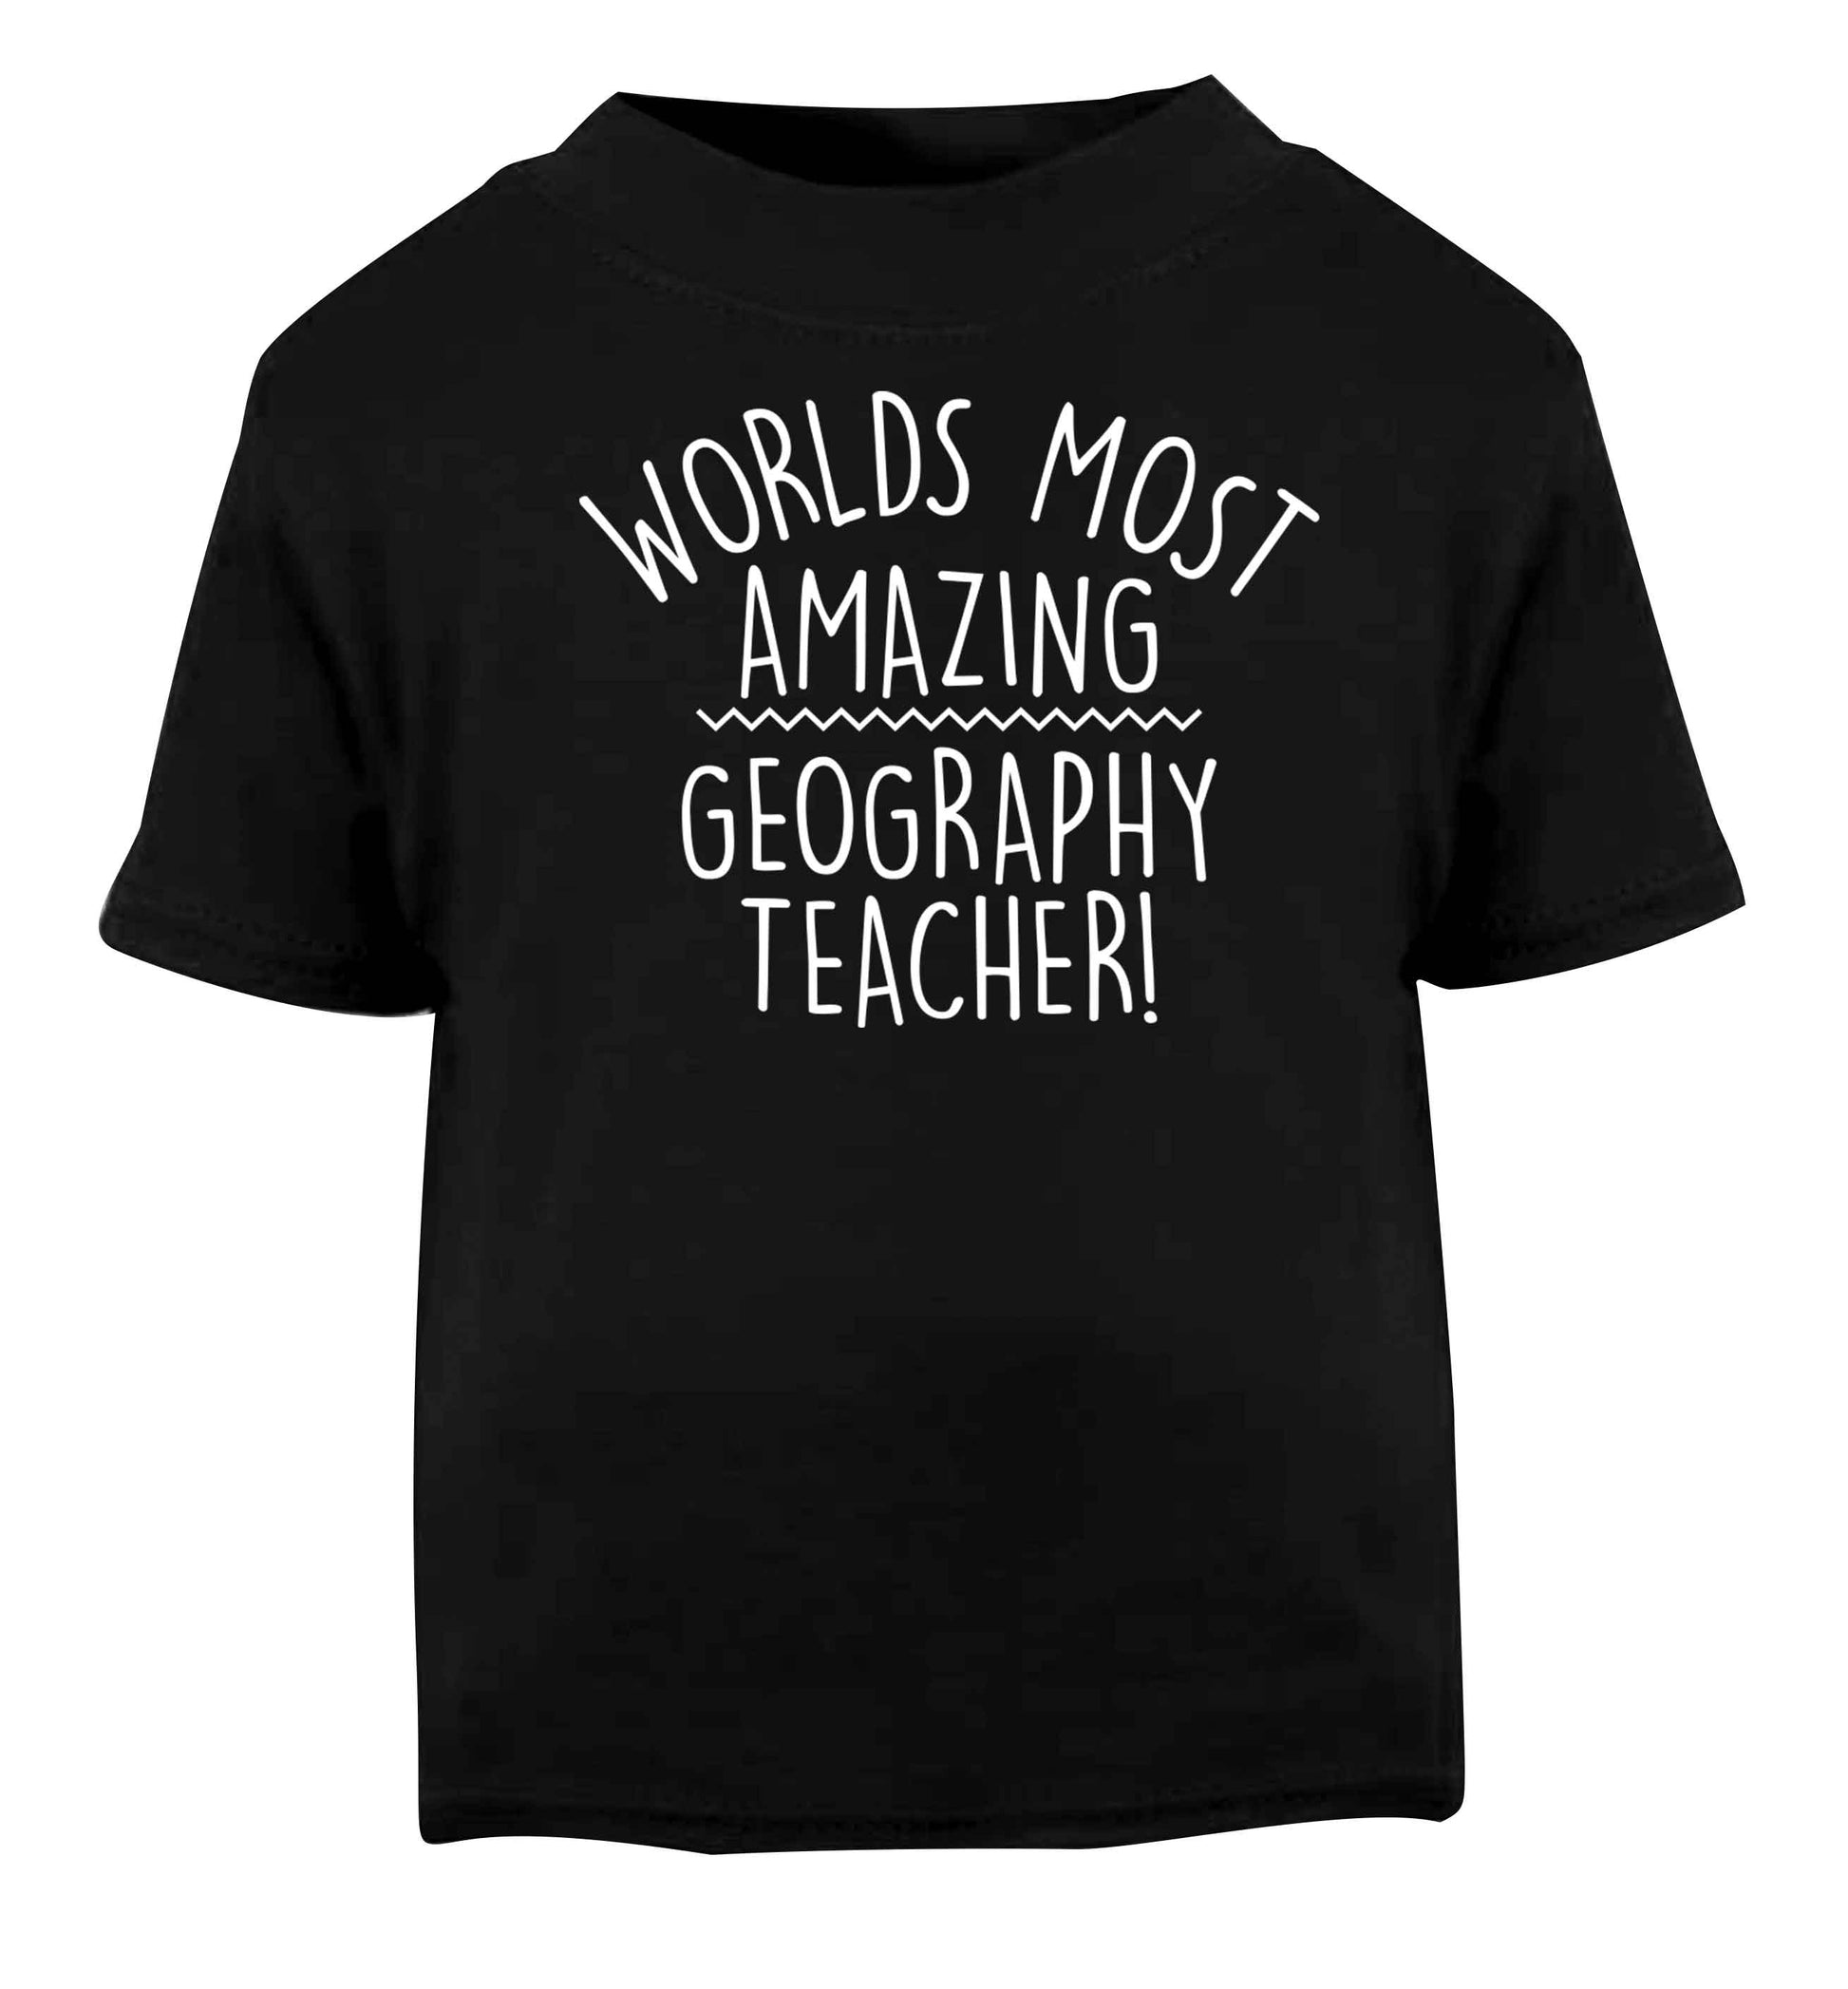 Worlds most amazing geography teacher Black baby toddler Tshirt 2 years